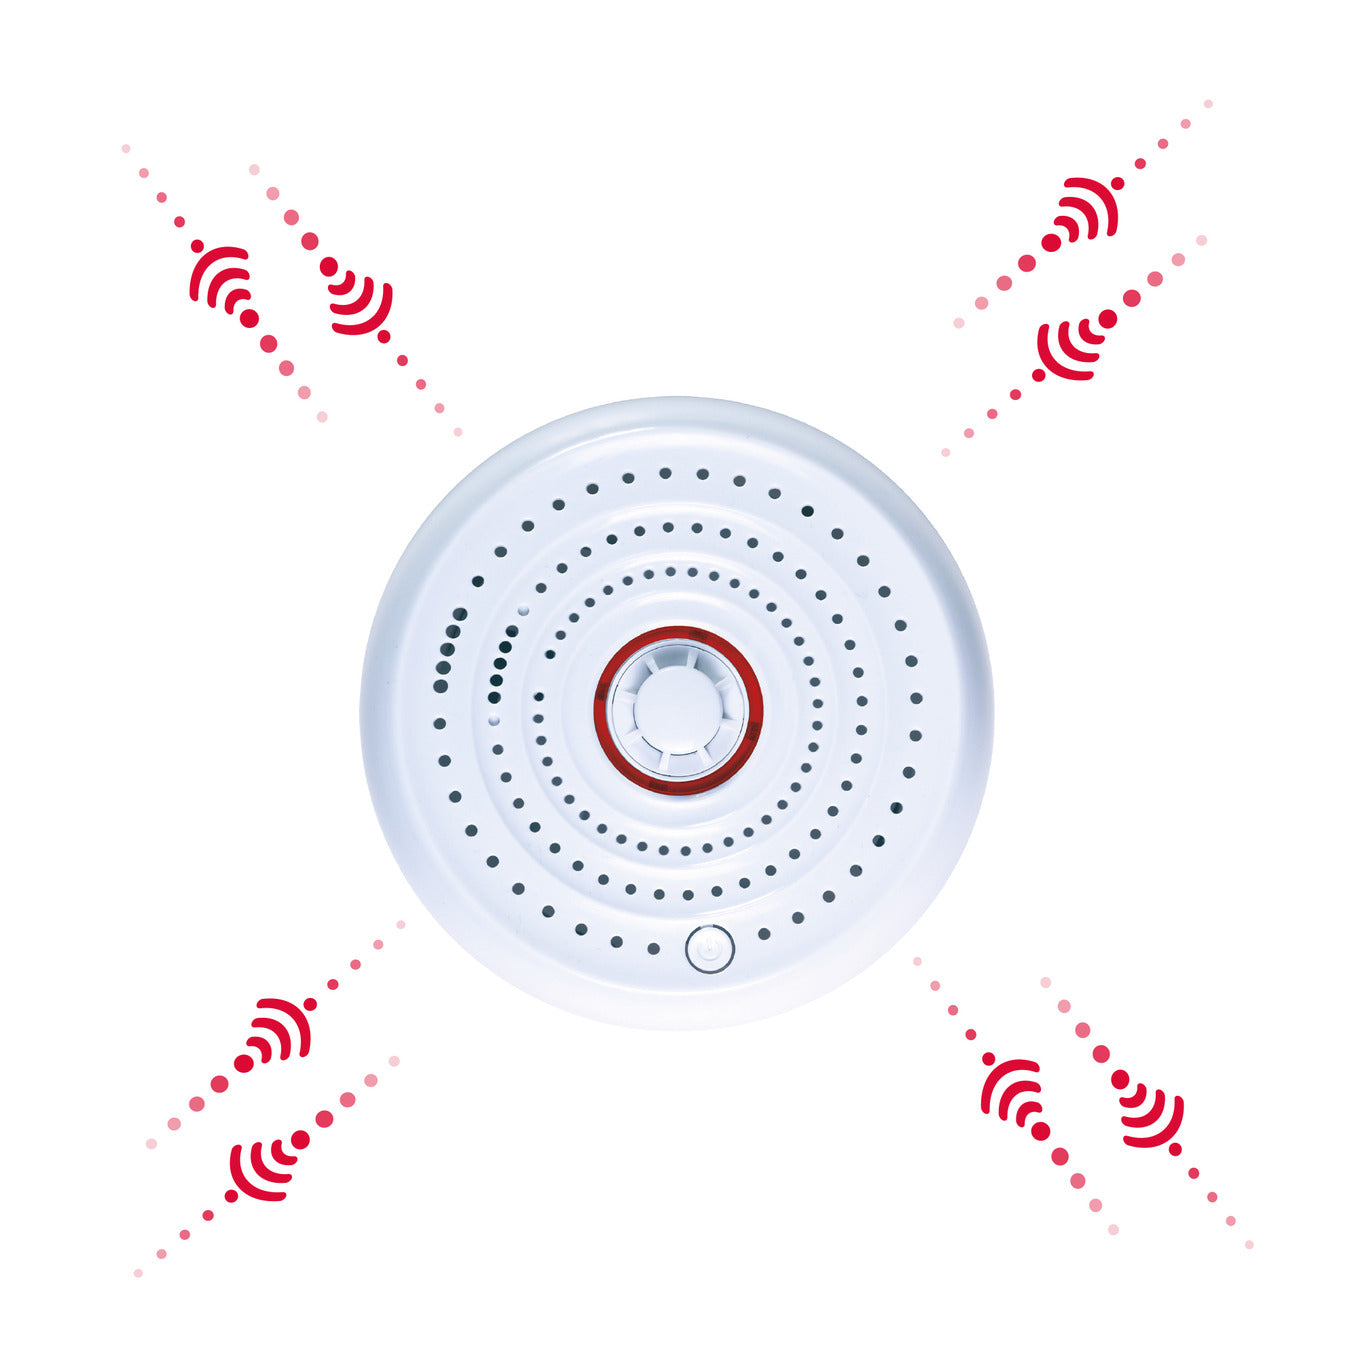 Firexo 5 Unit Interlinked Optical Smoke Alarm, Heat Alarm, and Carbon Monoxide Alarm Multipack with 10 Year Tamper Proof Battery, White. 3x Smoke Alarm, 1x Heat Alarm, 1x Carbon Monoxide alarm